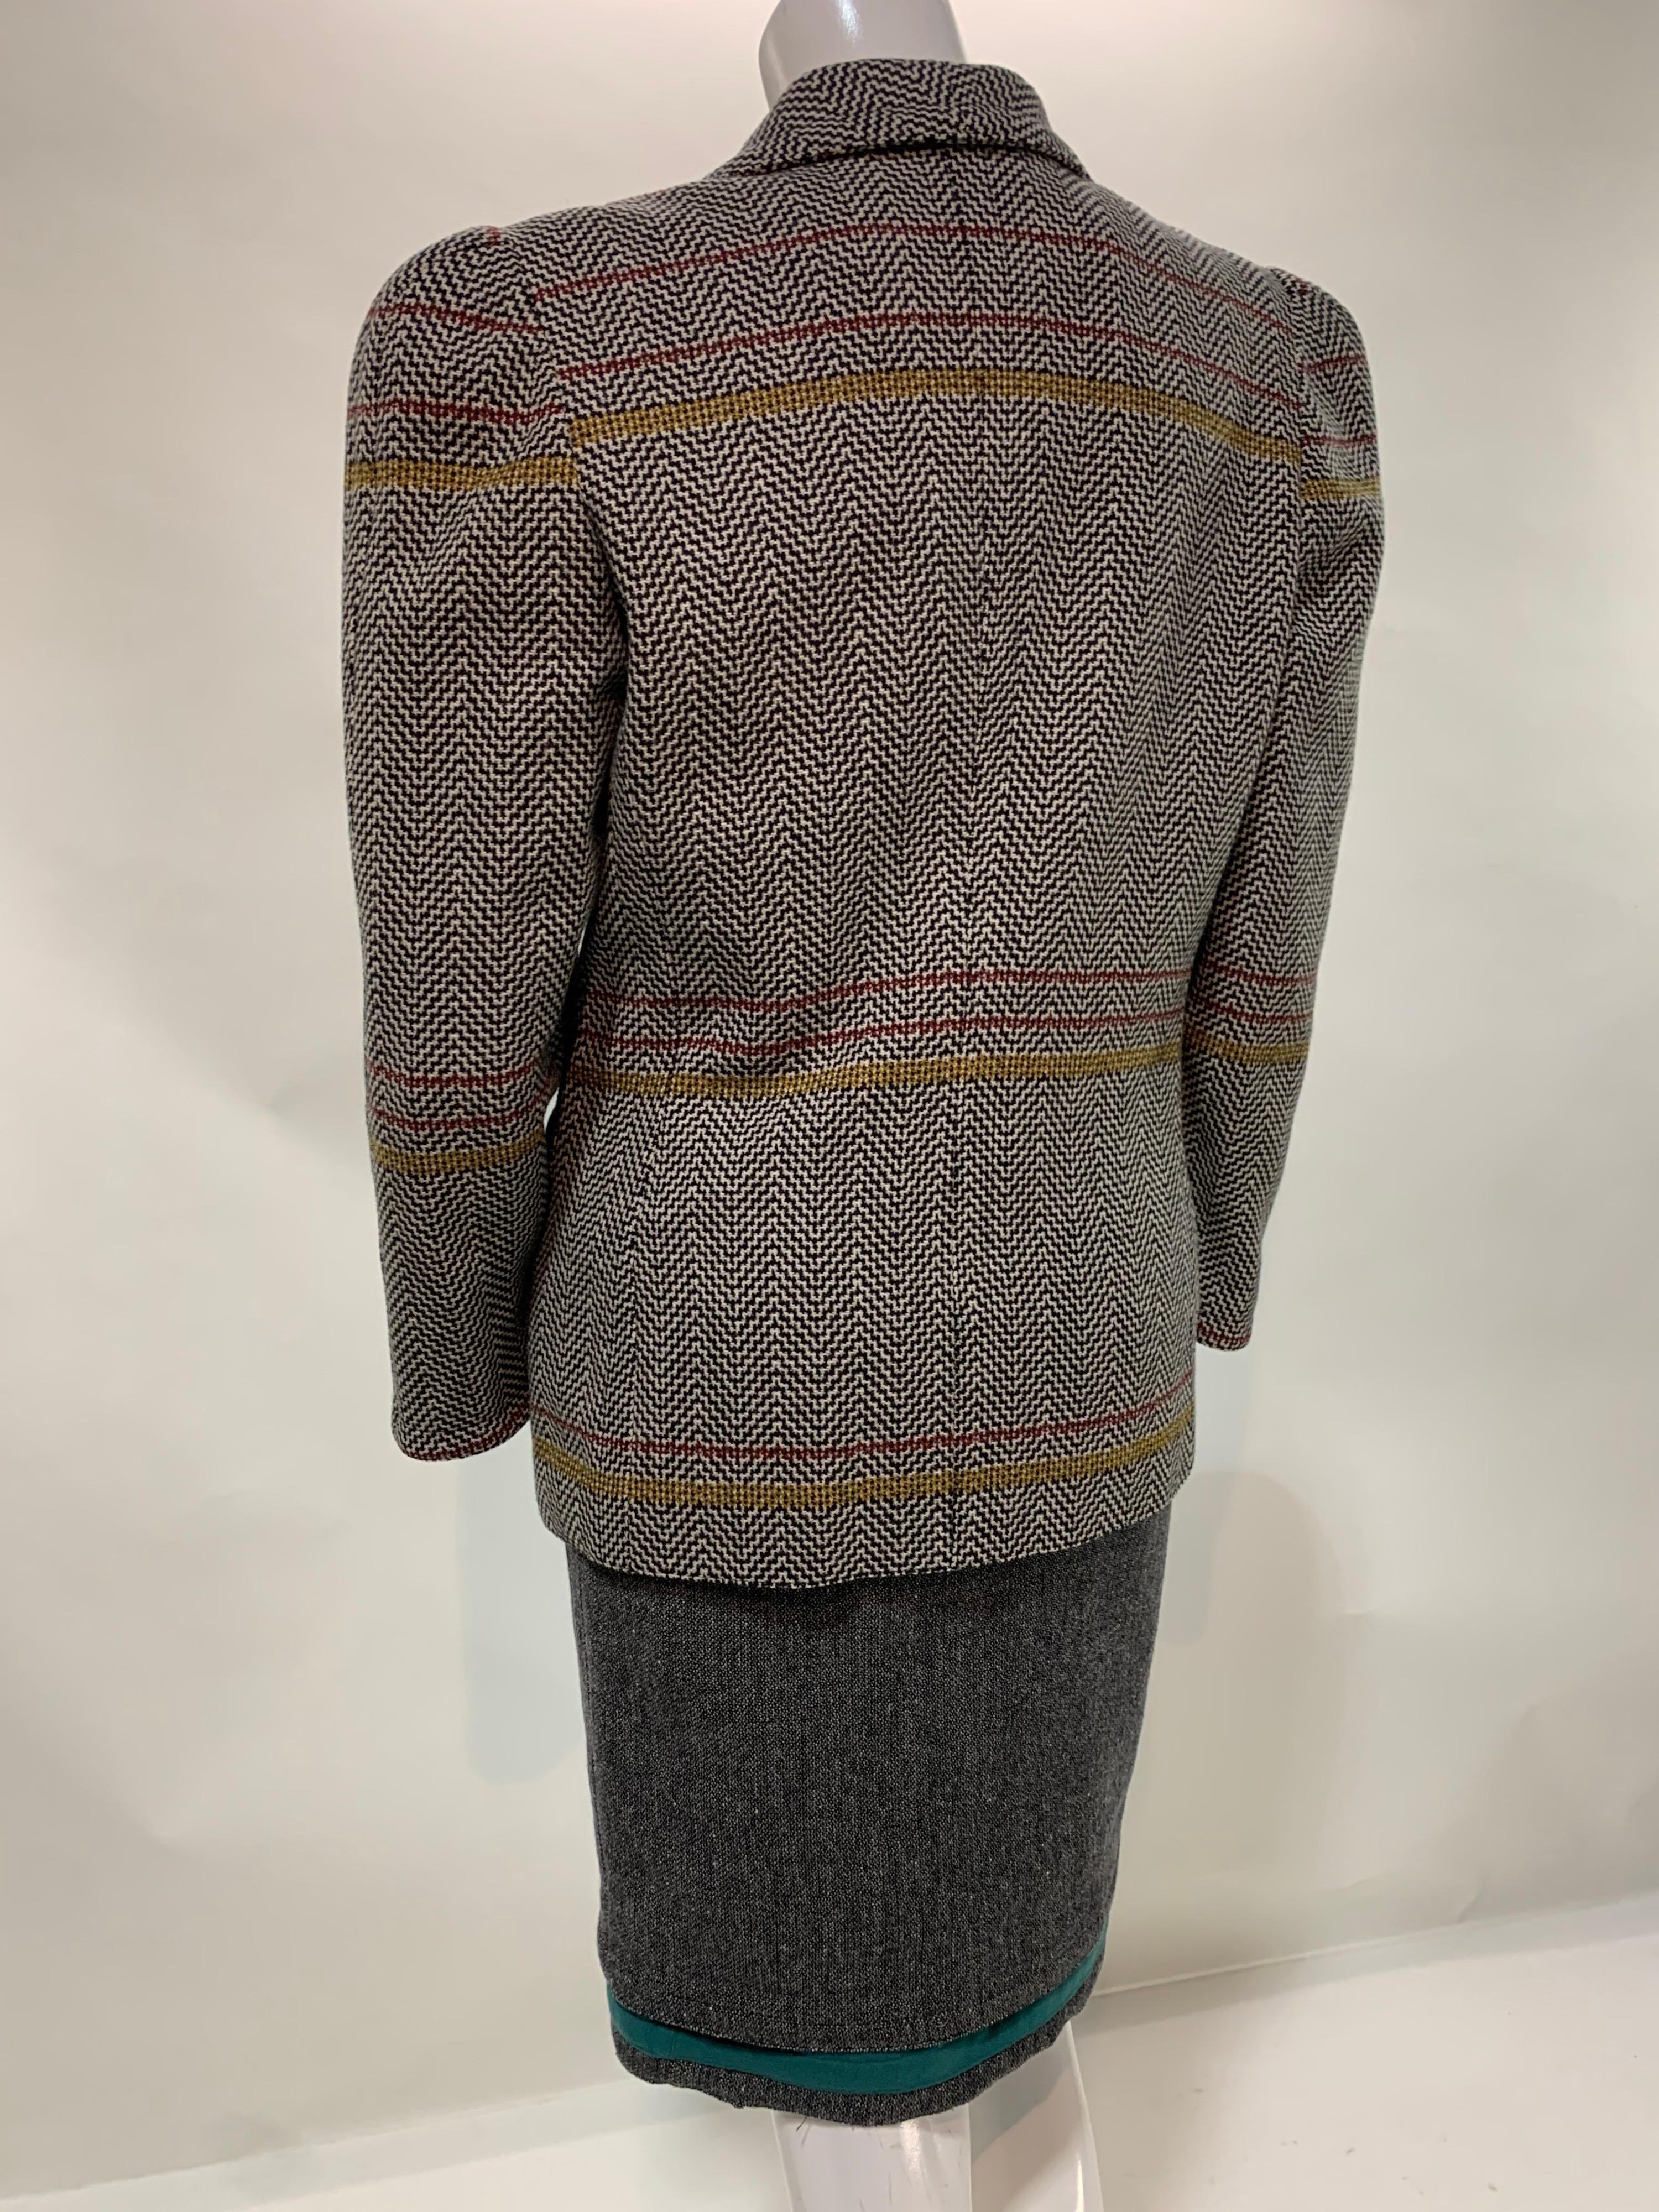 1980 Gianni Versace Mixed Tweed Skirt Suit w/ Structured Shoulder Silhouette For Sale 5